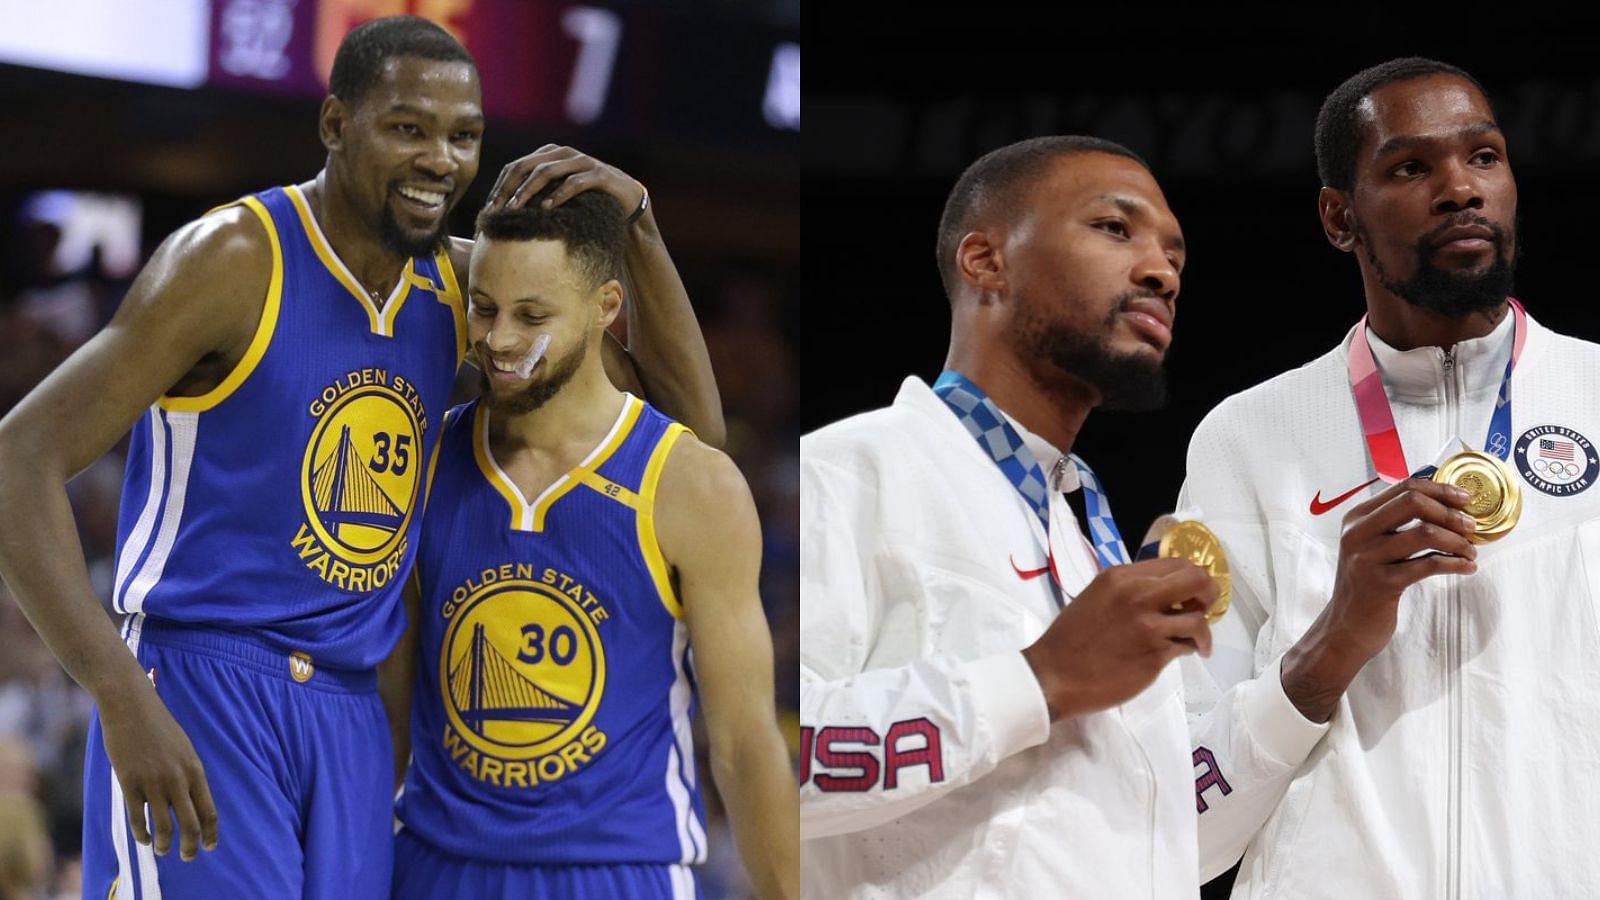 “Dame sent SOS to Kevin Durant to save HIS legacy like Stephen Curry”: Skip Bayless launches attack on the Warriors and Blazers stars